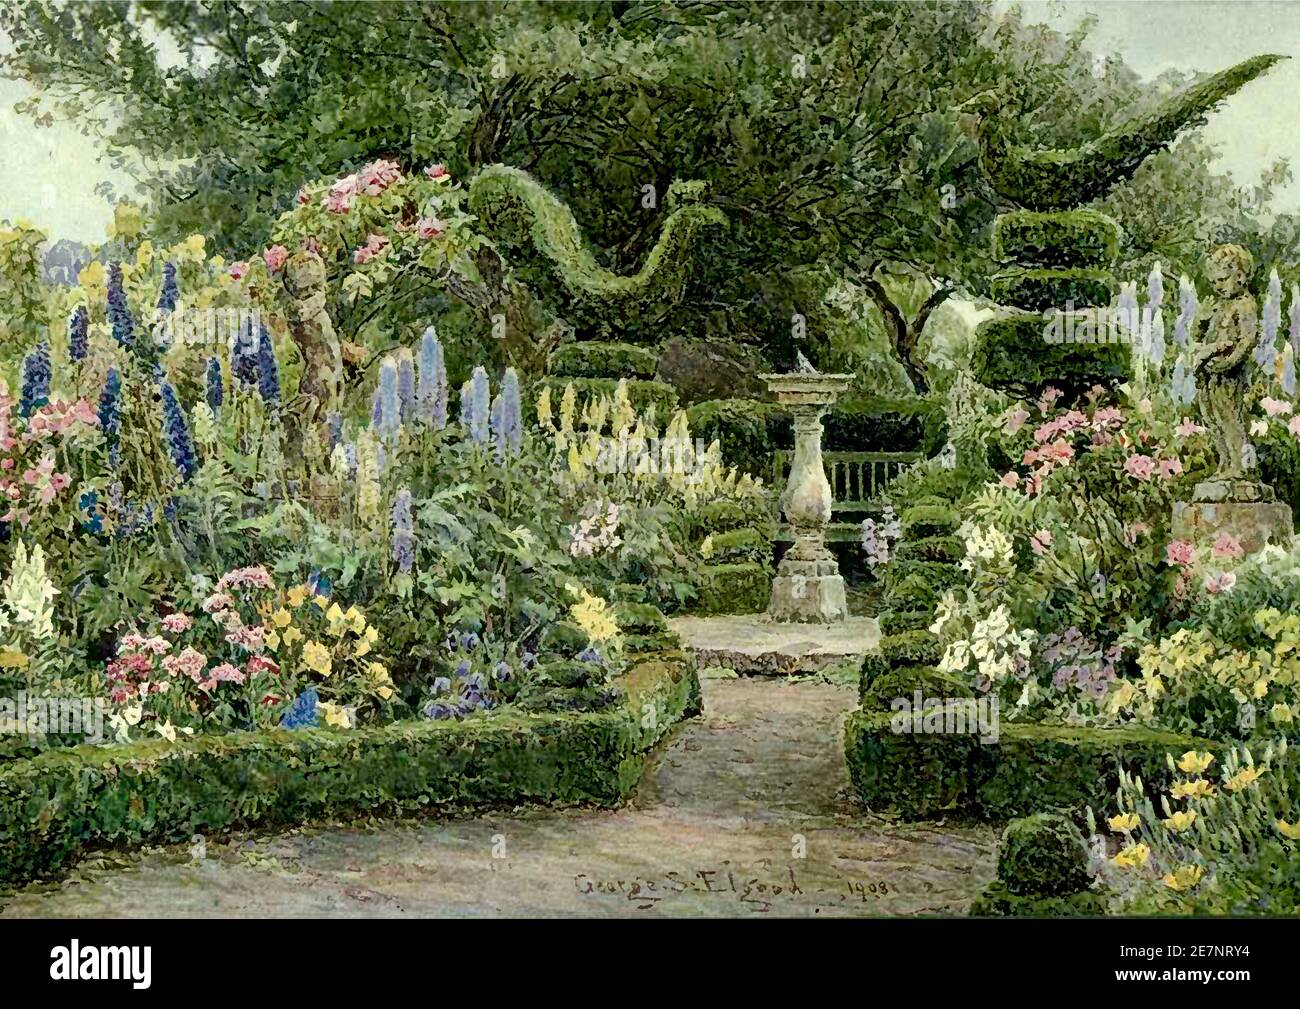 Vintage George Samuel Elgood painting - il Dial Garden at Markfield [che è chiamato Raunscliffe nella didascalia] Leicestershire, Inghilterra - 1900's. Foto Stock